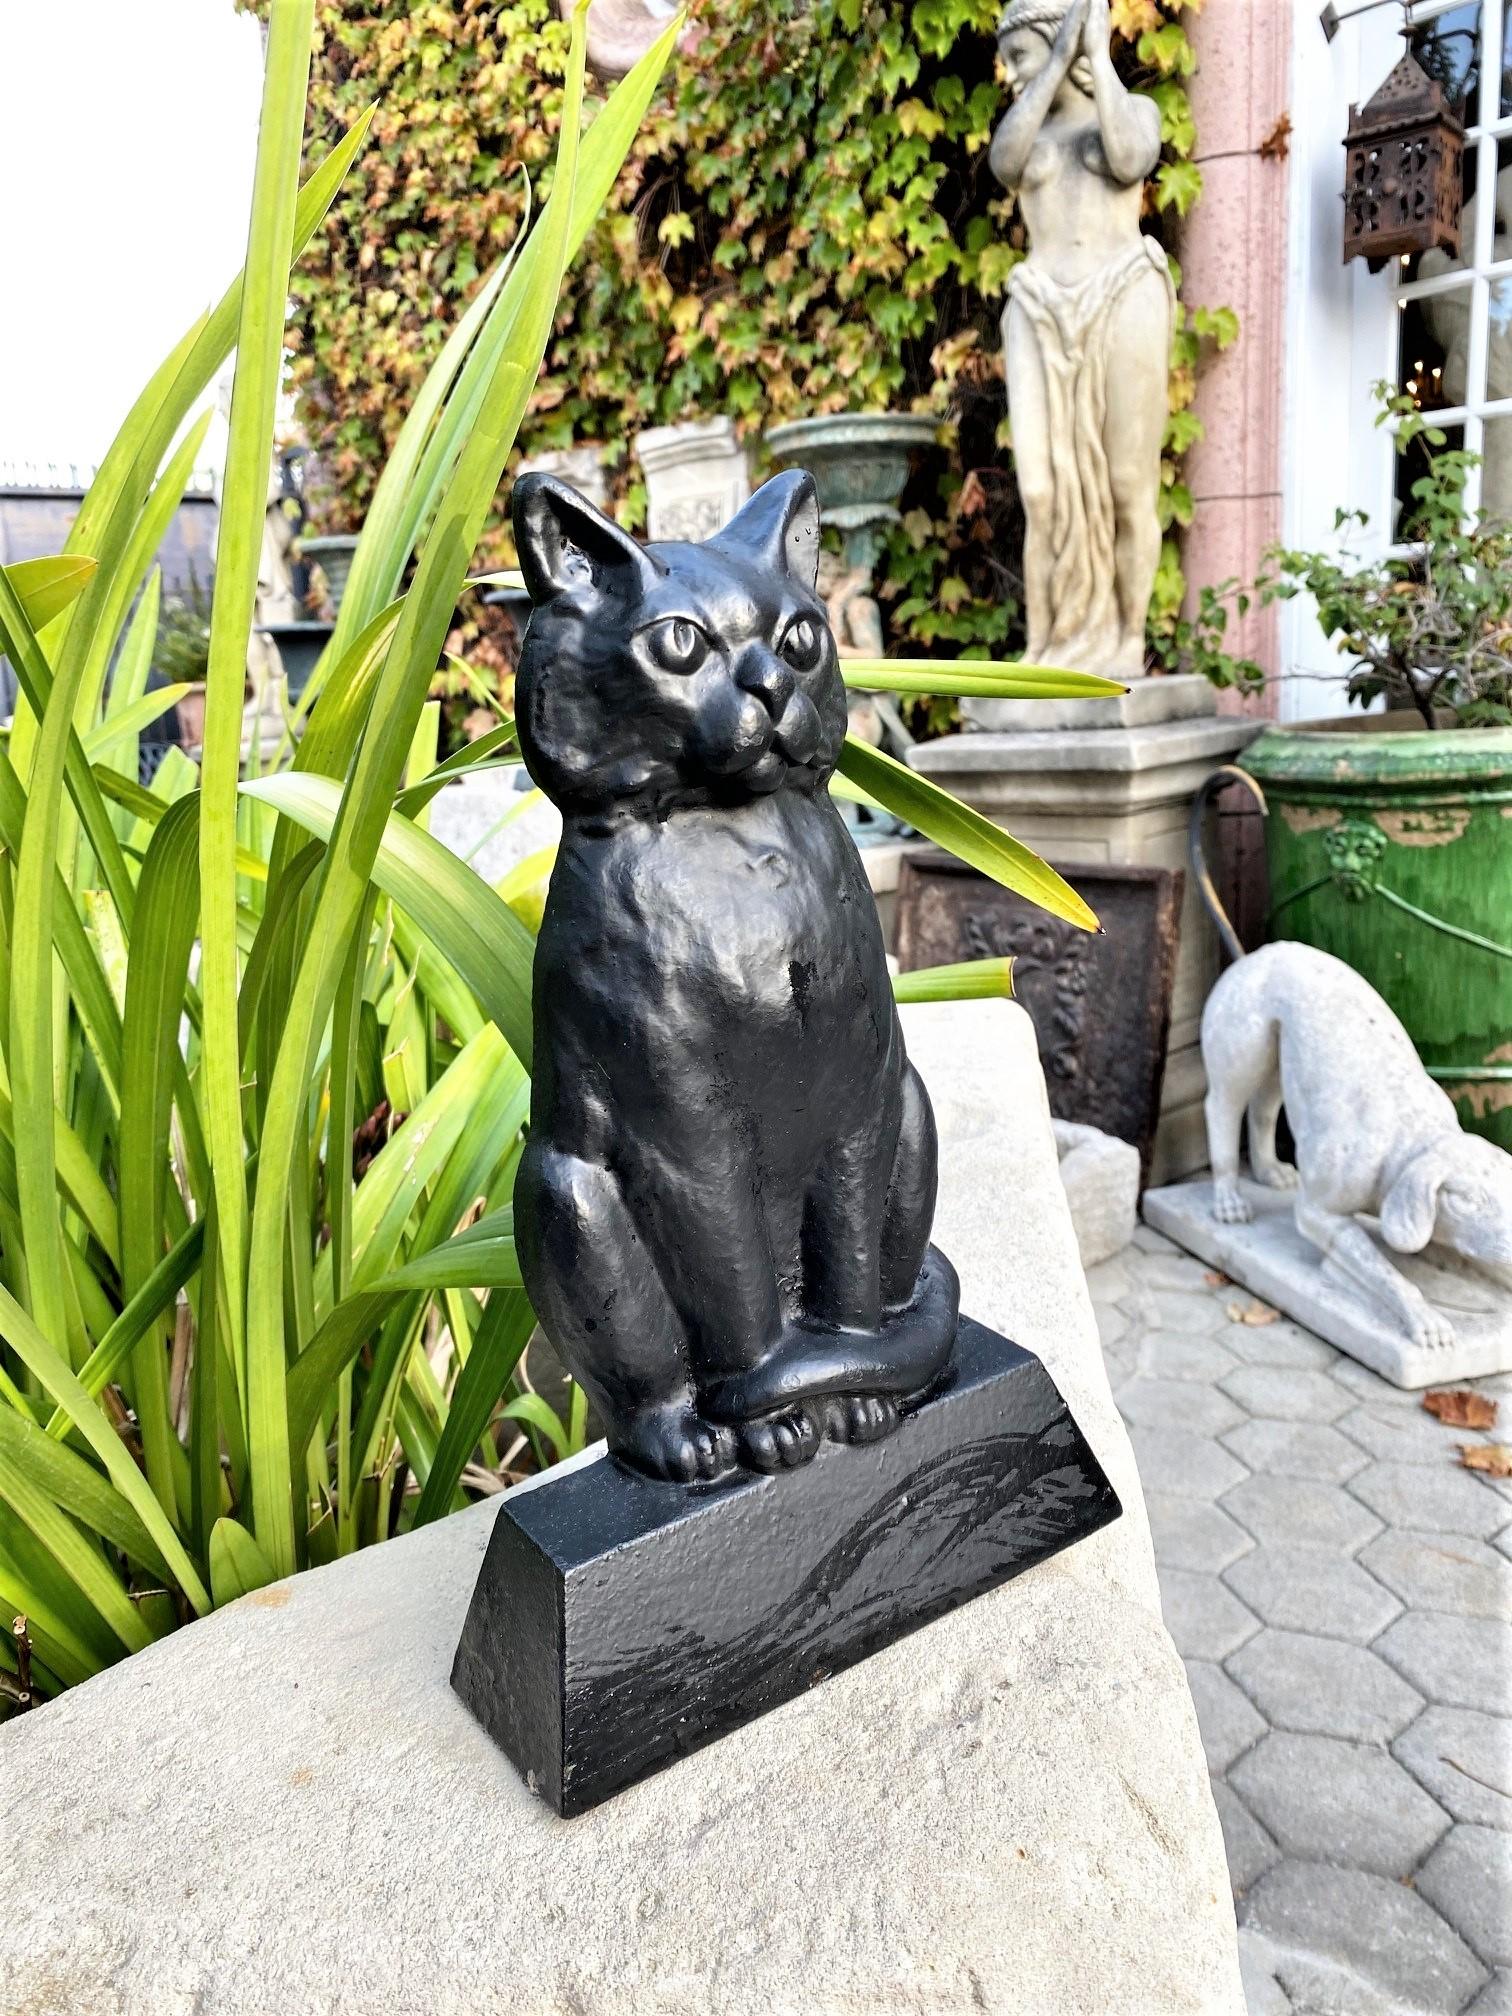 Black cat of cast iron hand painted door stop decorative gift for holiday season
Beautiful cast Iron of late 19th century Early 20th C. black cat of hand painted door stop decorative gift idea. Iron doorstop modelled as a sitting upright cat